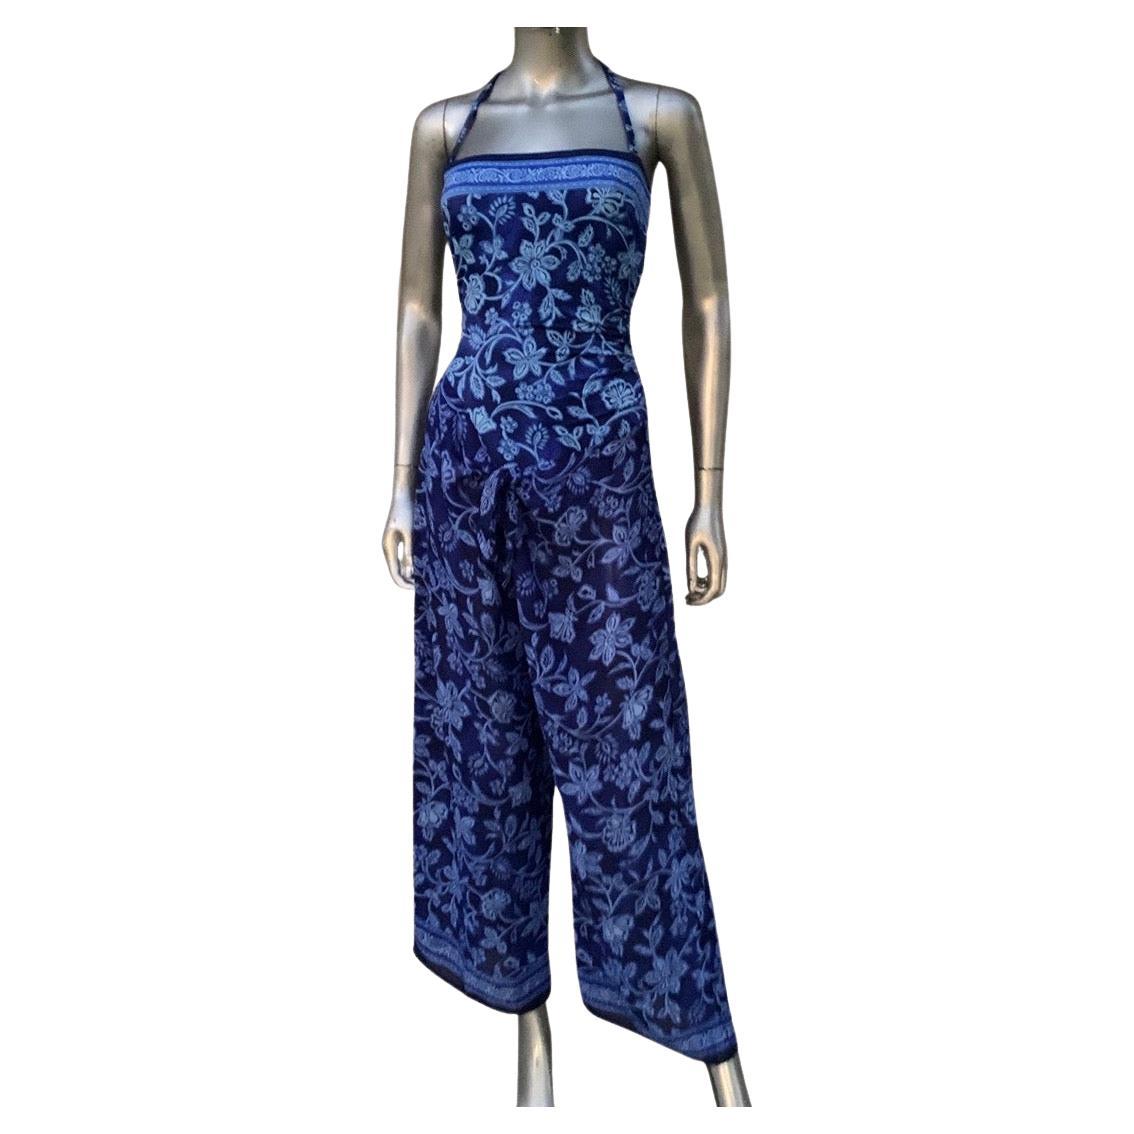 Swimsuit and Chiffon Tie Pant Cover-Up Set Indigo Floral Print Size 8/Med For Sale